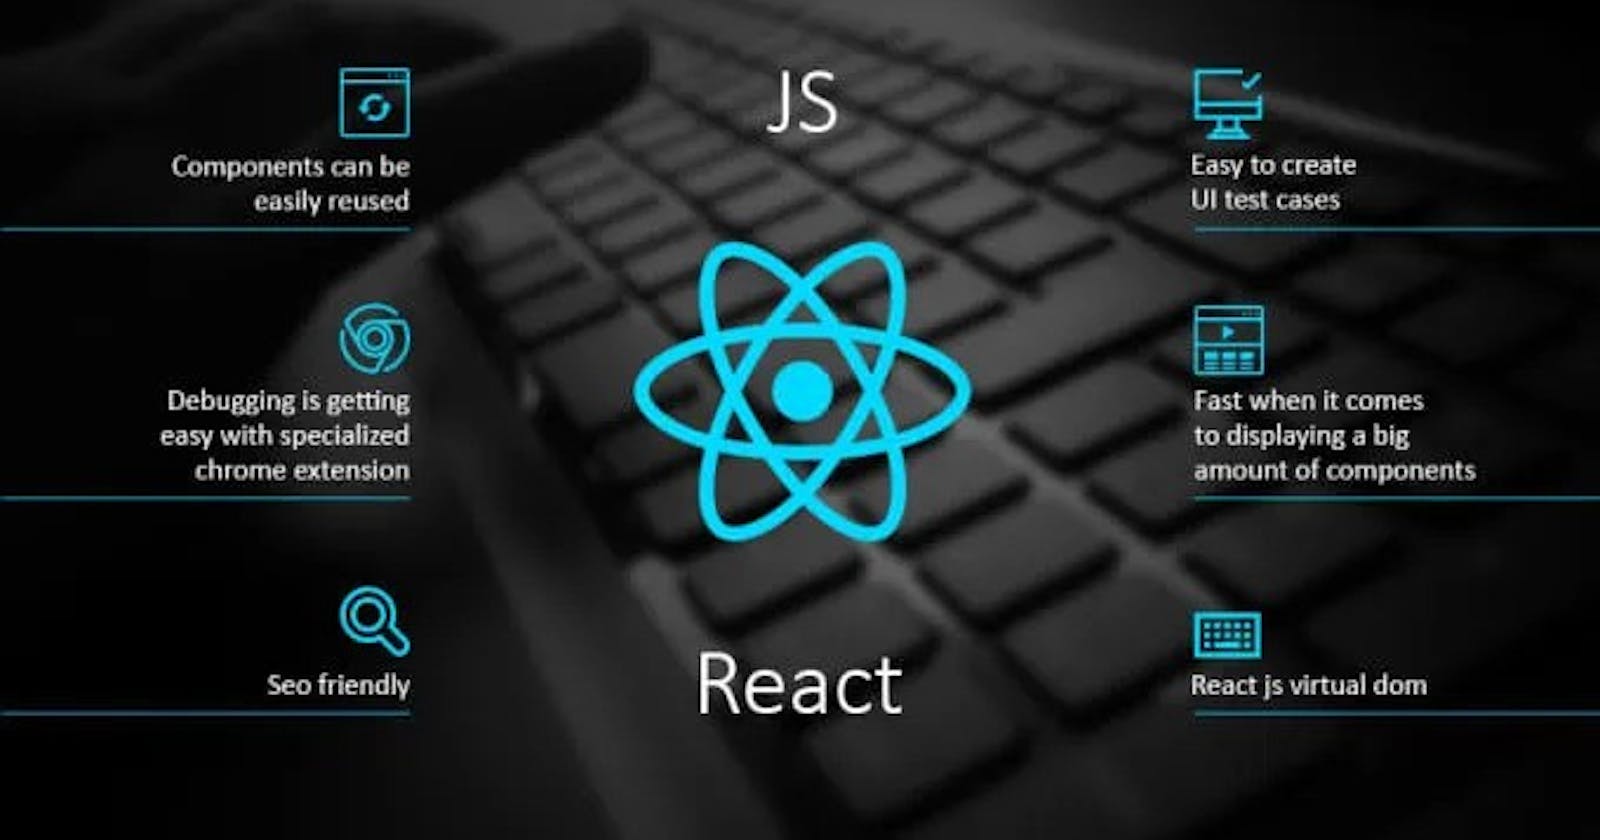 Building a One Page Web Application with 
React JS: A Step-by-Step Guide